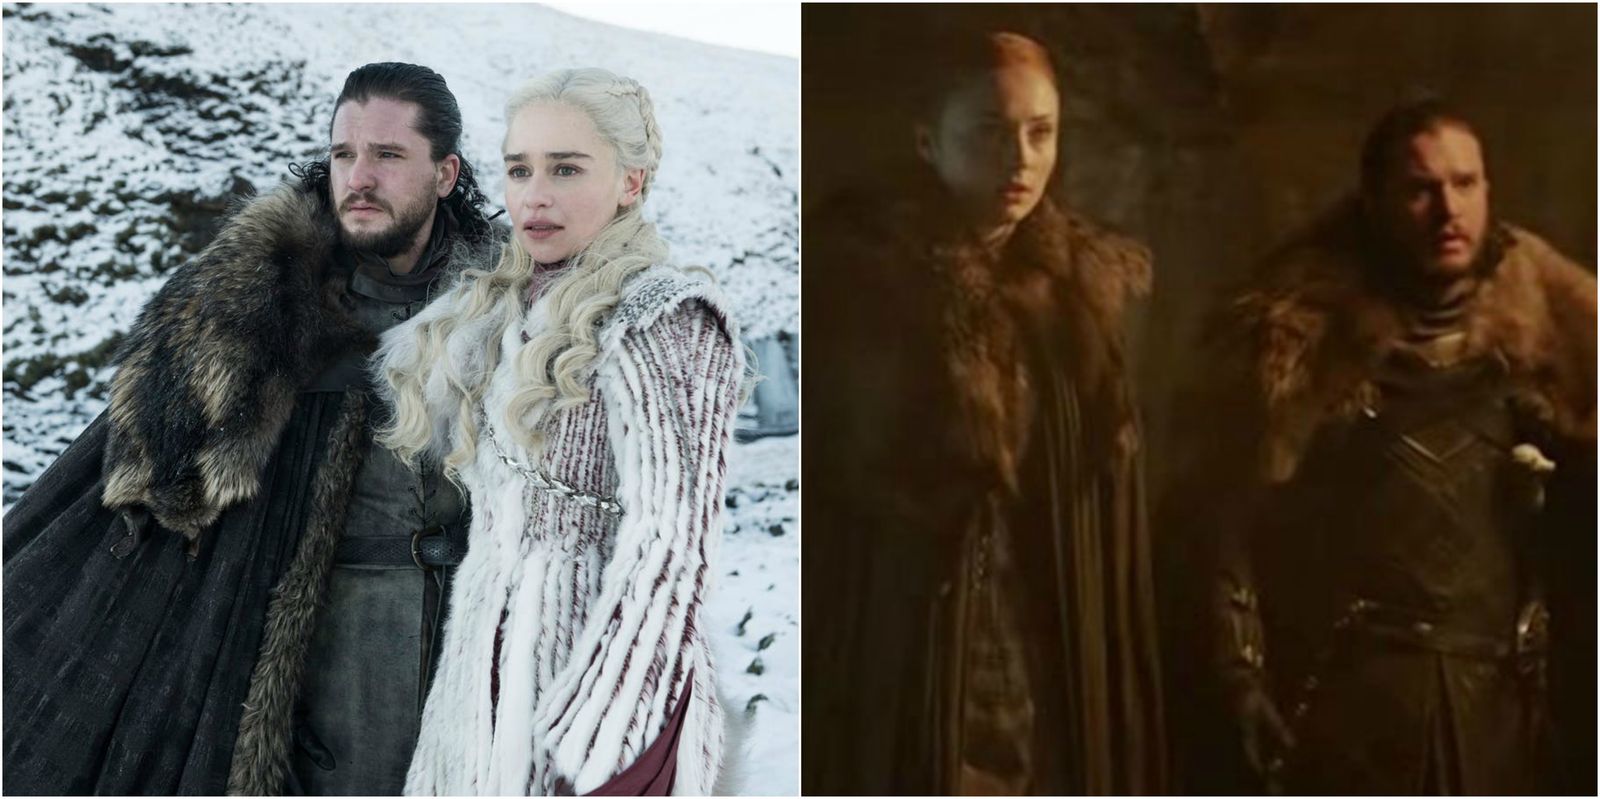 Game of Thrones Season 8 Episode 1: It's An All Star Reunion For GoT That Promises A Nail-Biting Season